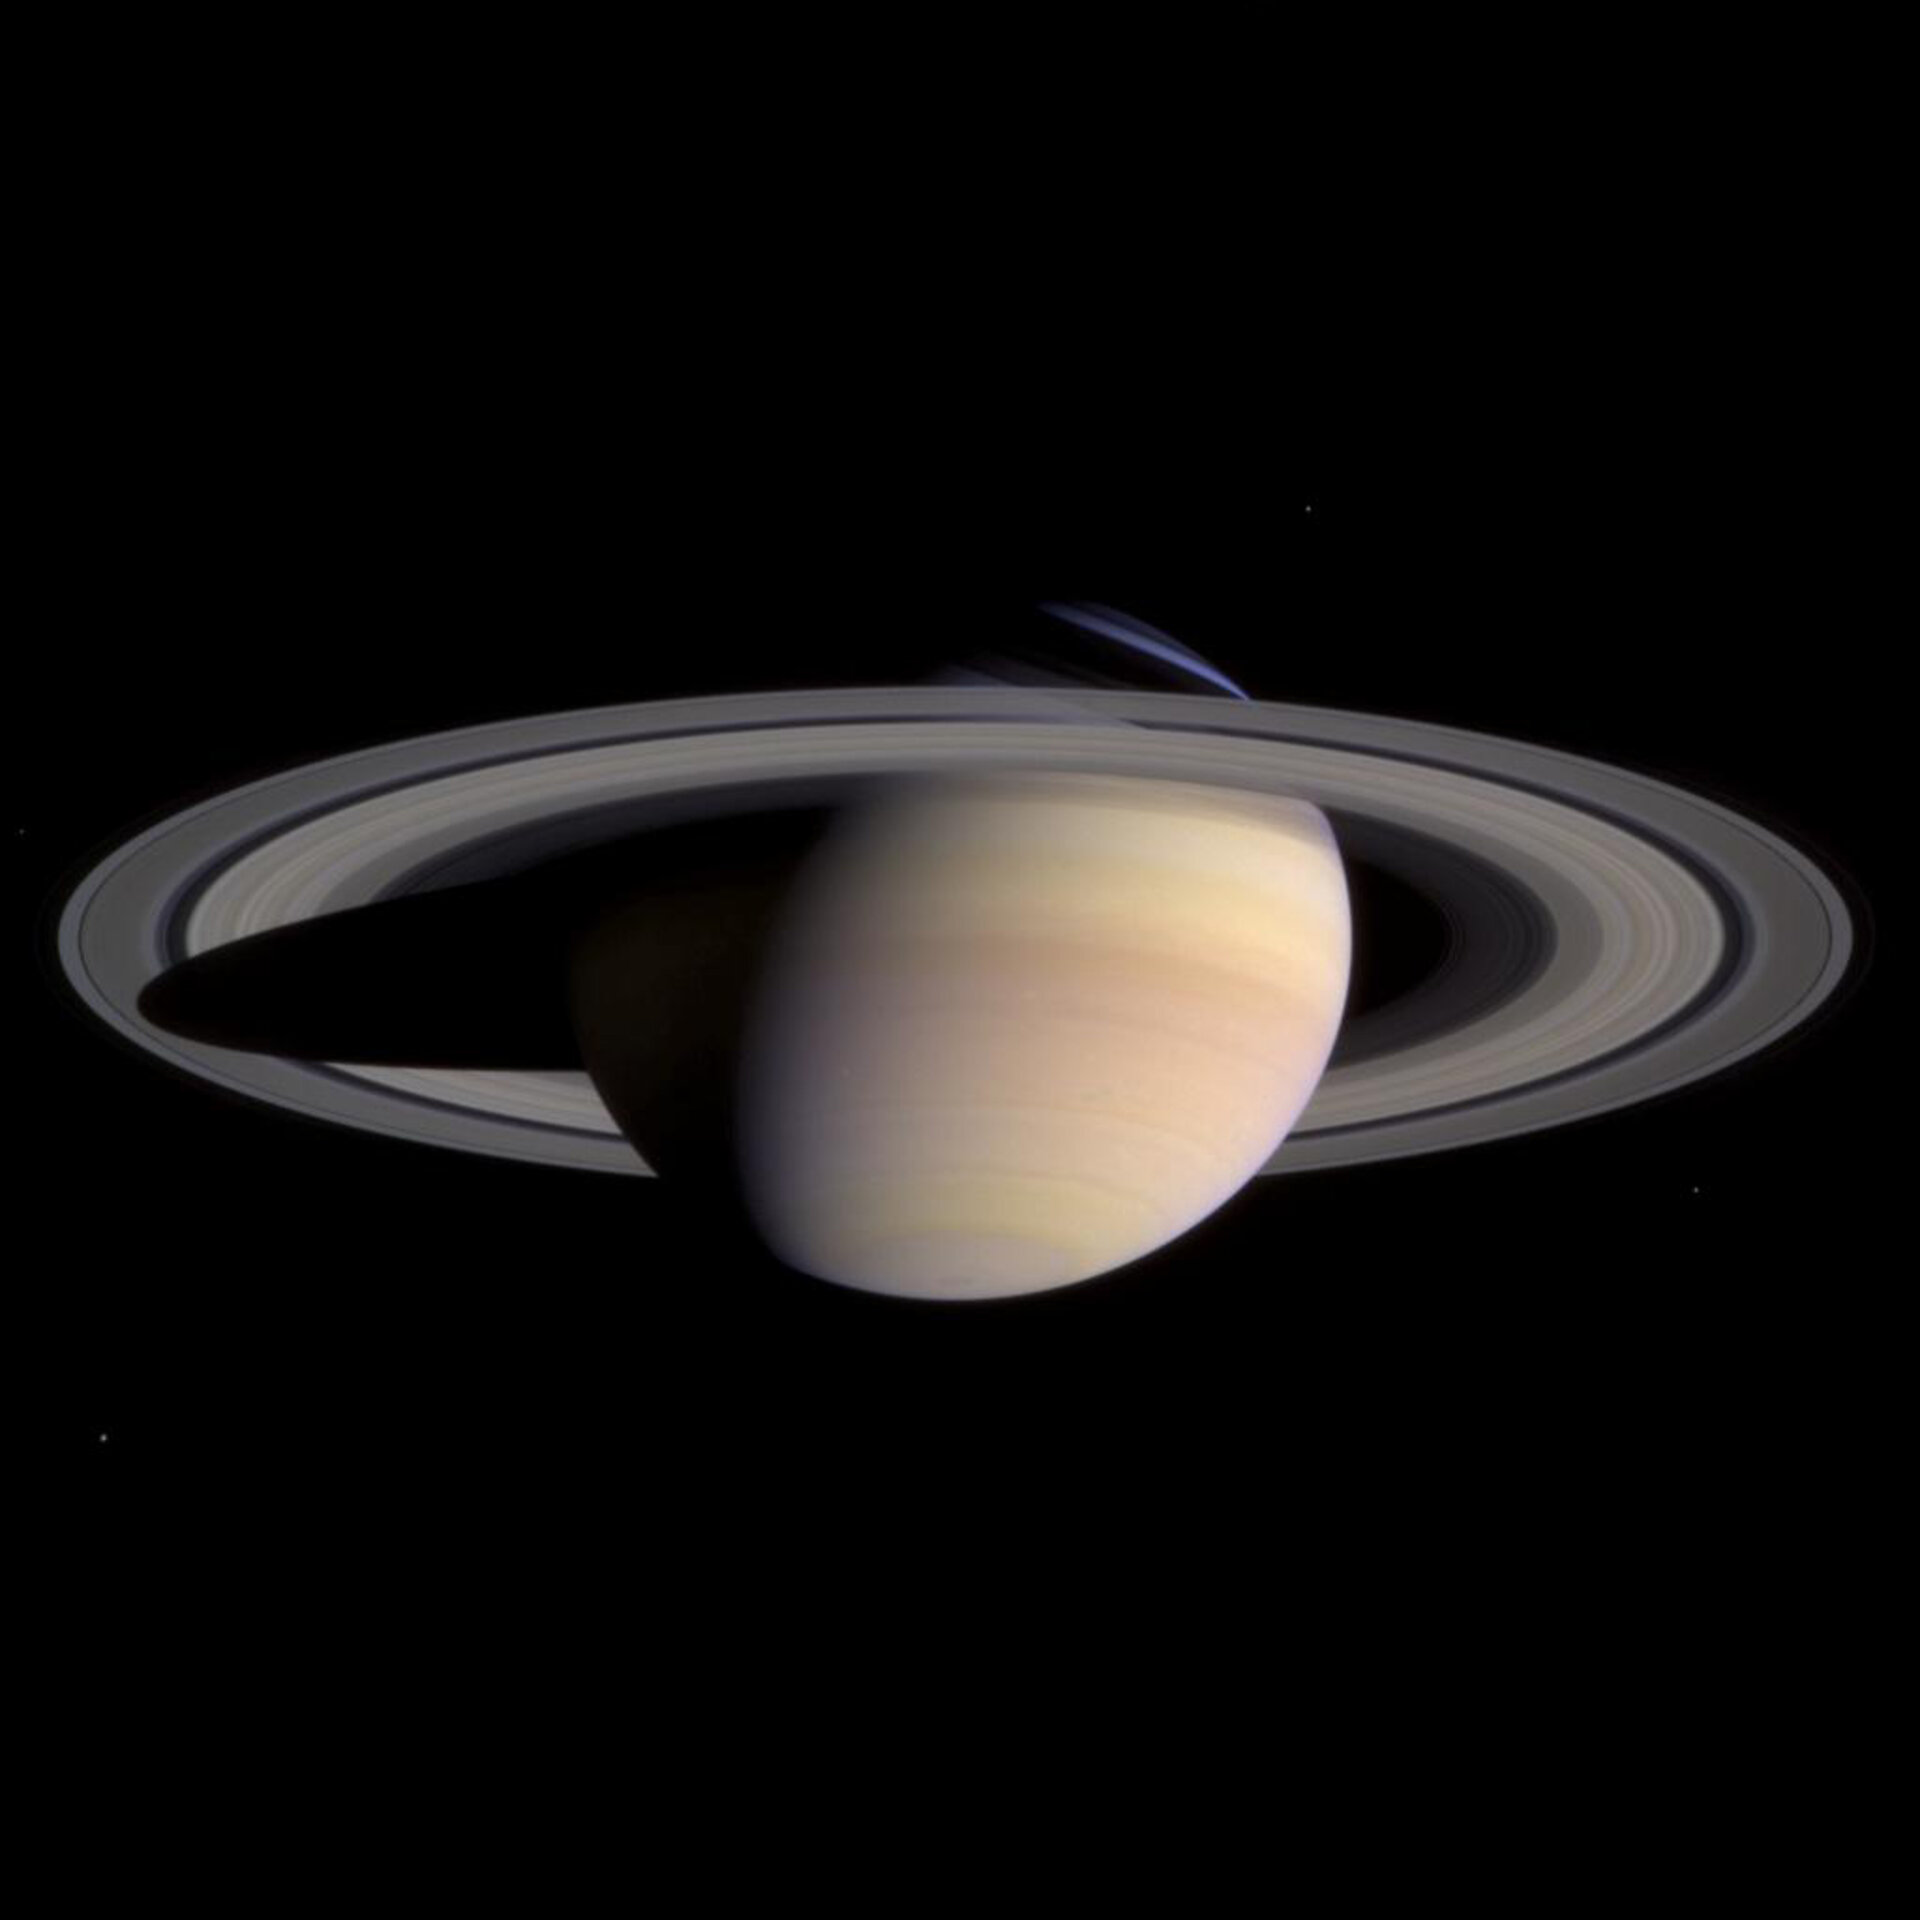 Last  chance for 'eyeful' of Saturn